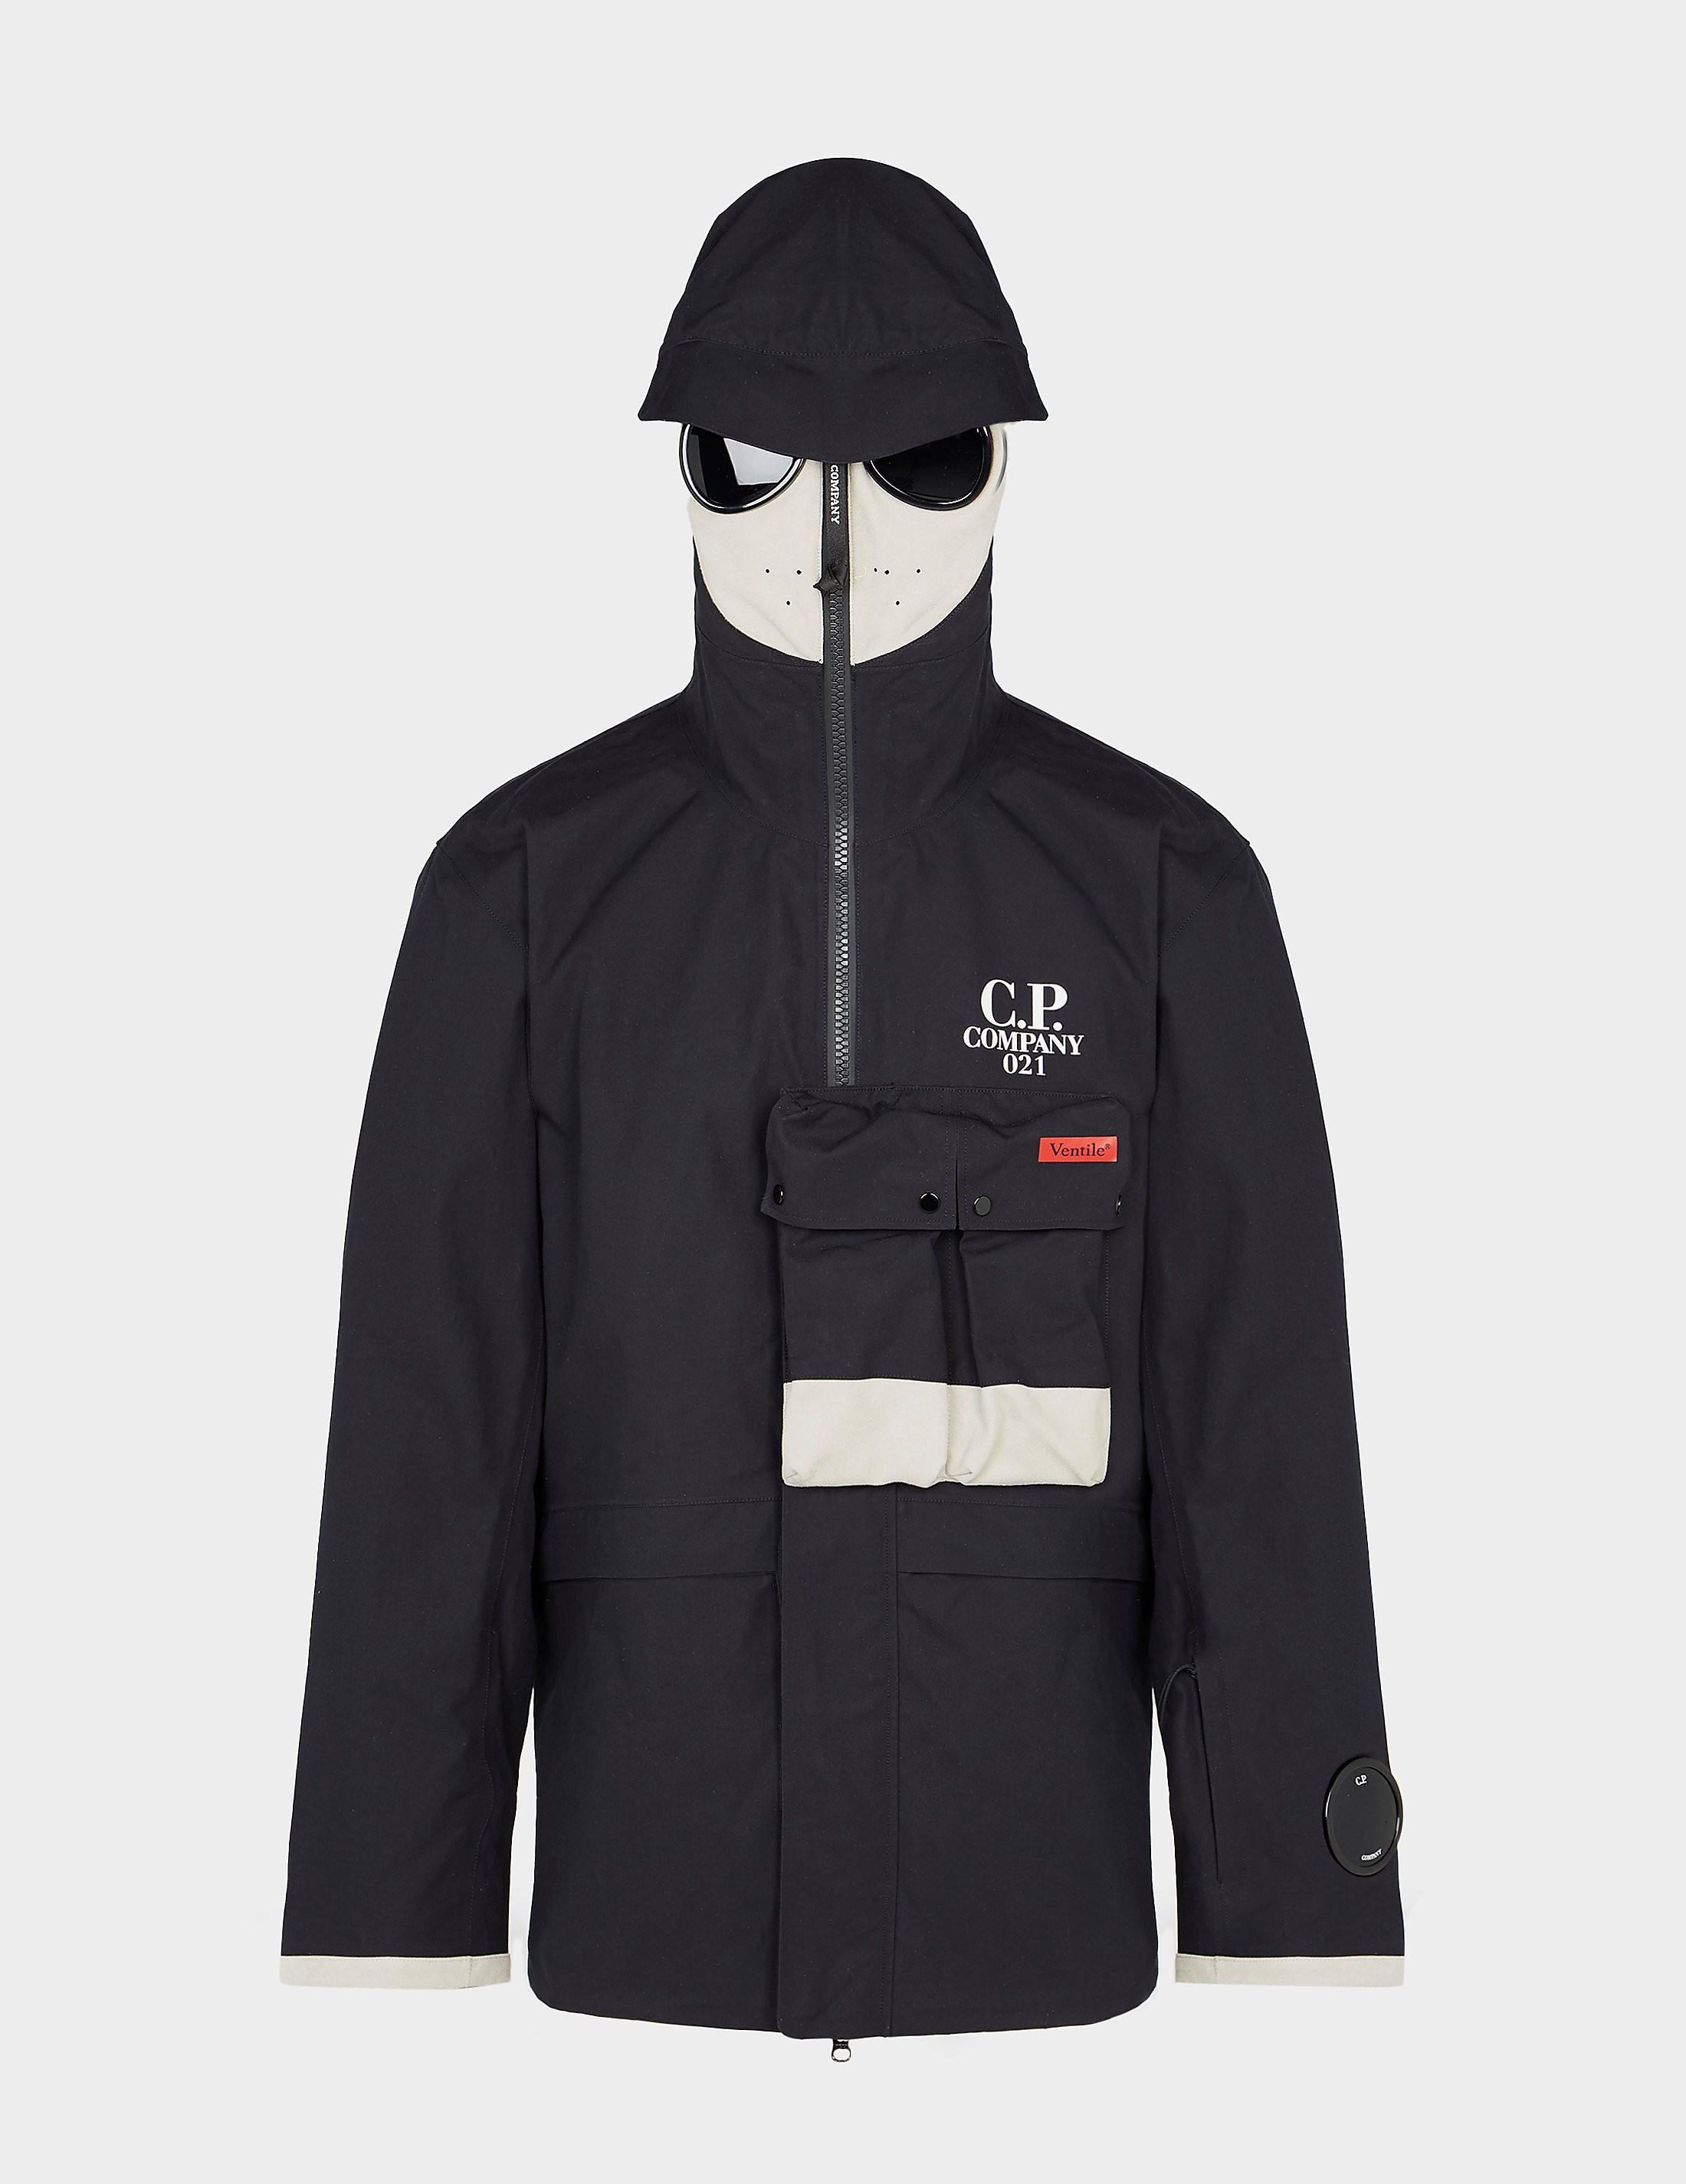 Cp Company Explorer Jacket Top Sellers, SAVE 40% - online-pmo.com